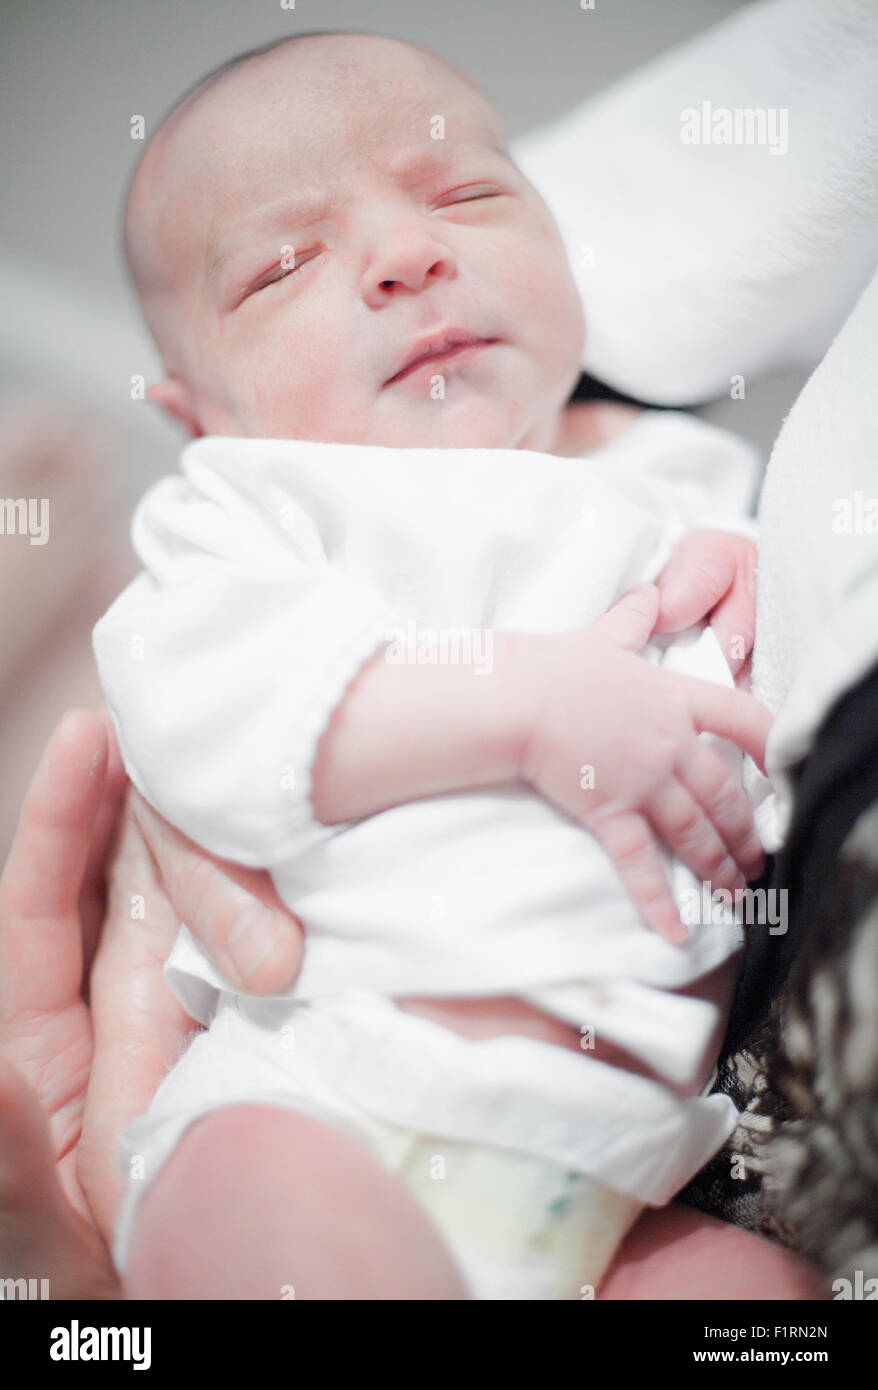 Cute newborn baby girl sleeping in mother's arms Stock Photo